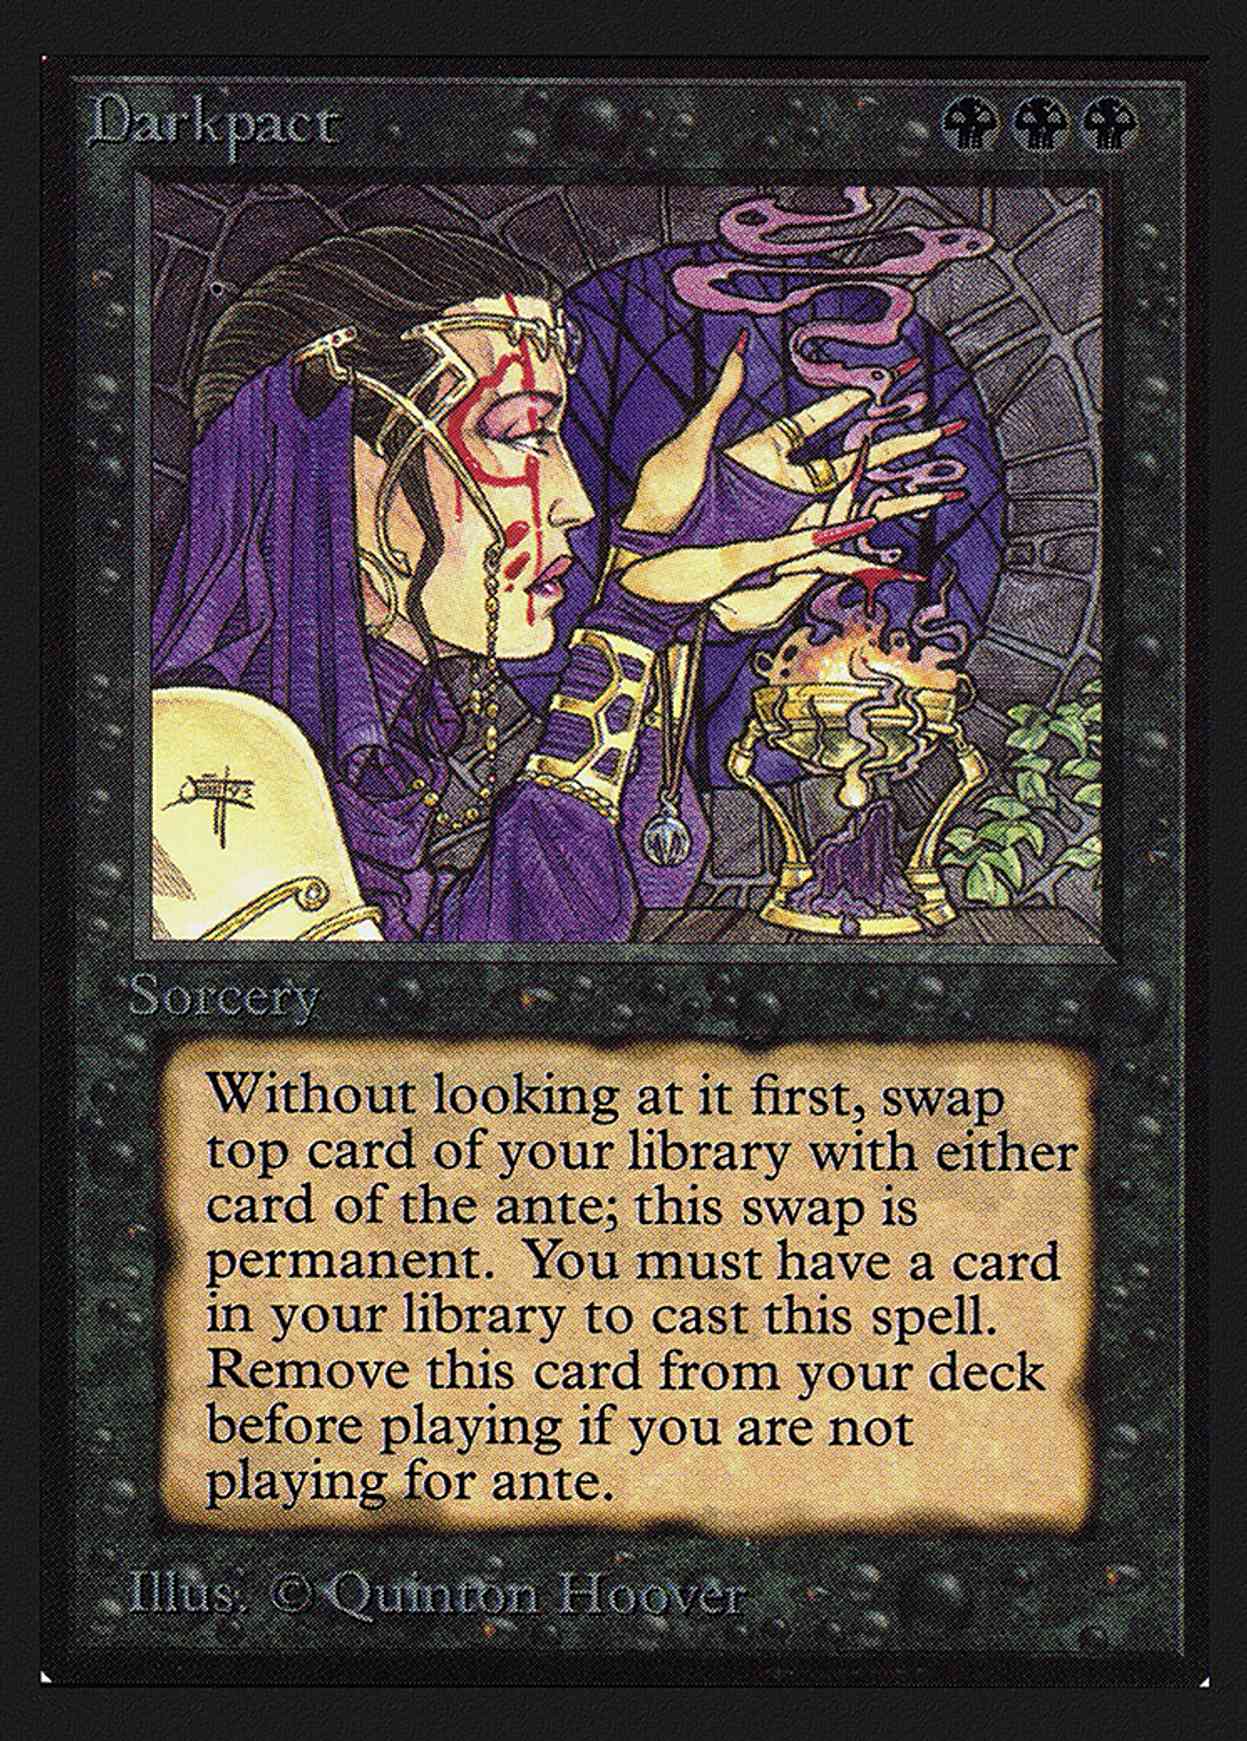 Darkpact (IE) magic card front